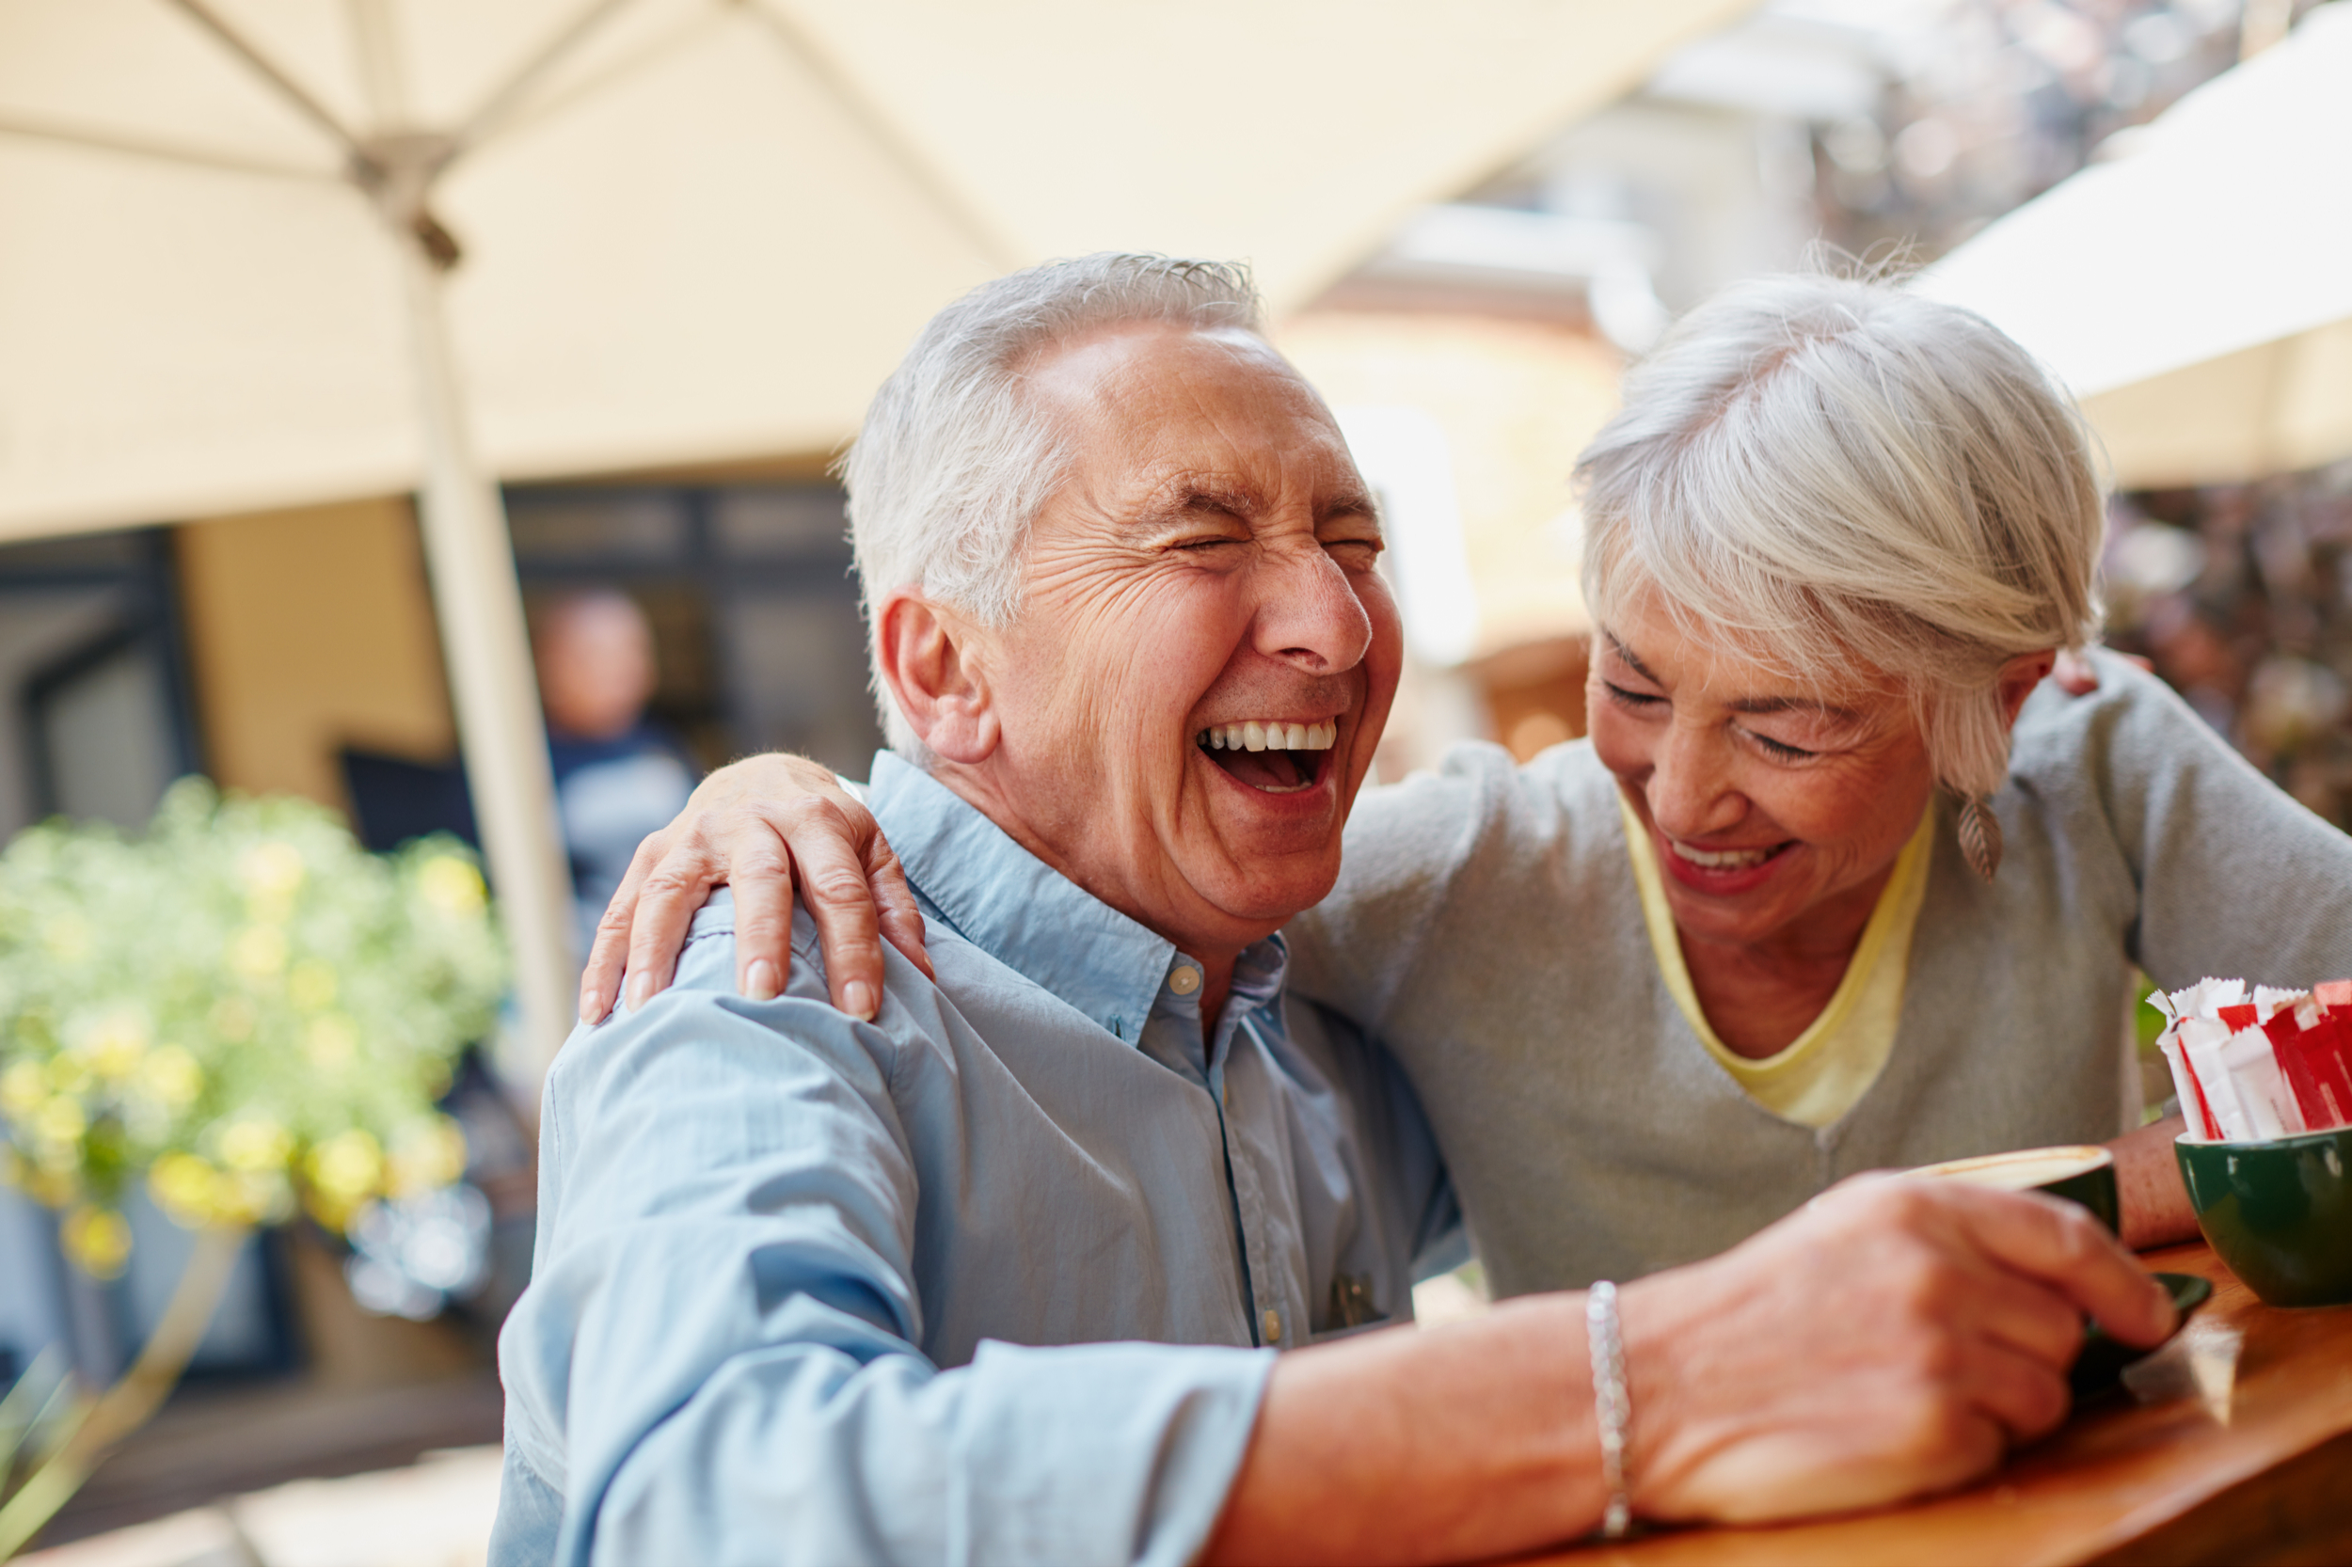 A retired couple laughing at a café.